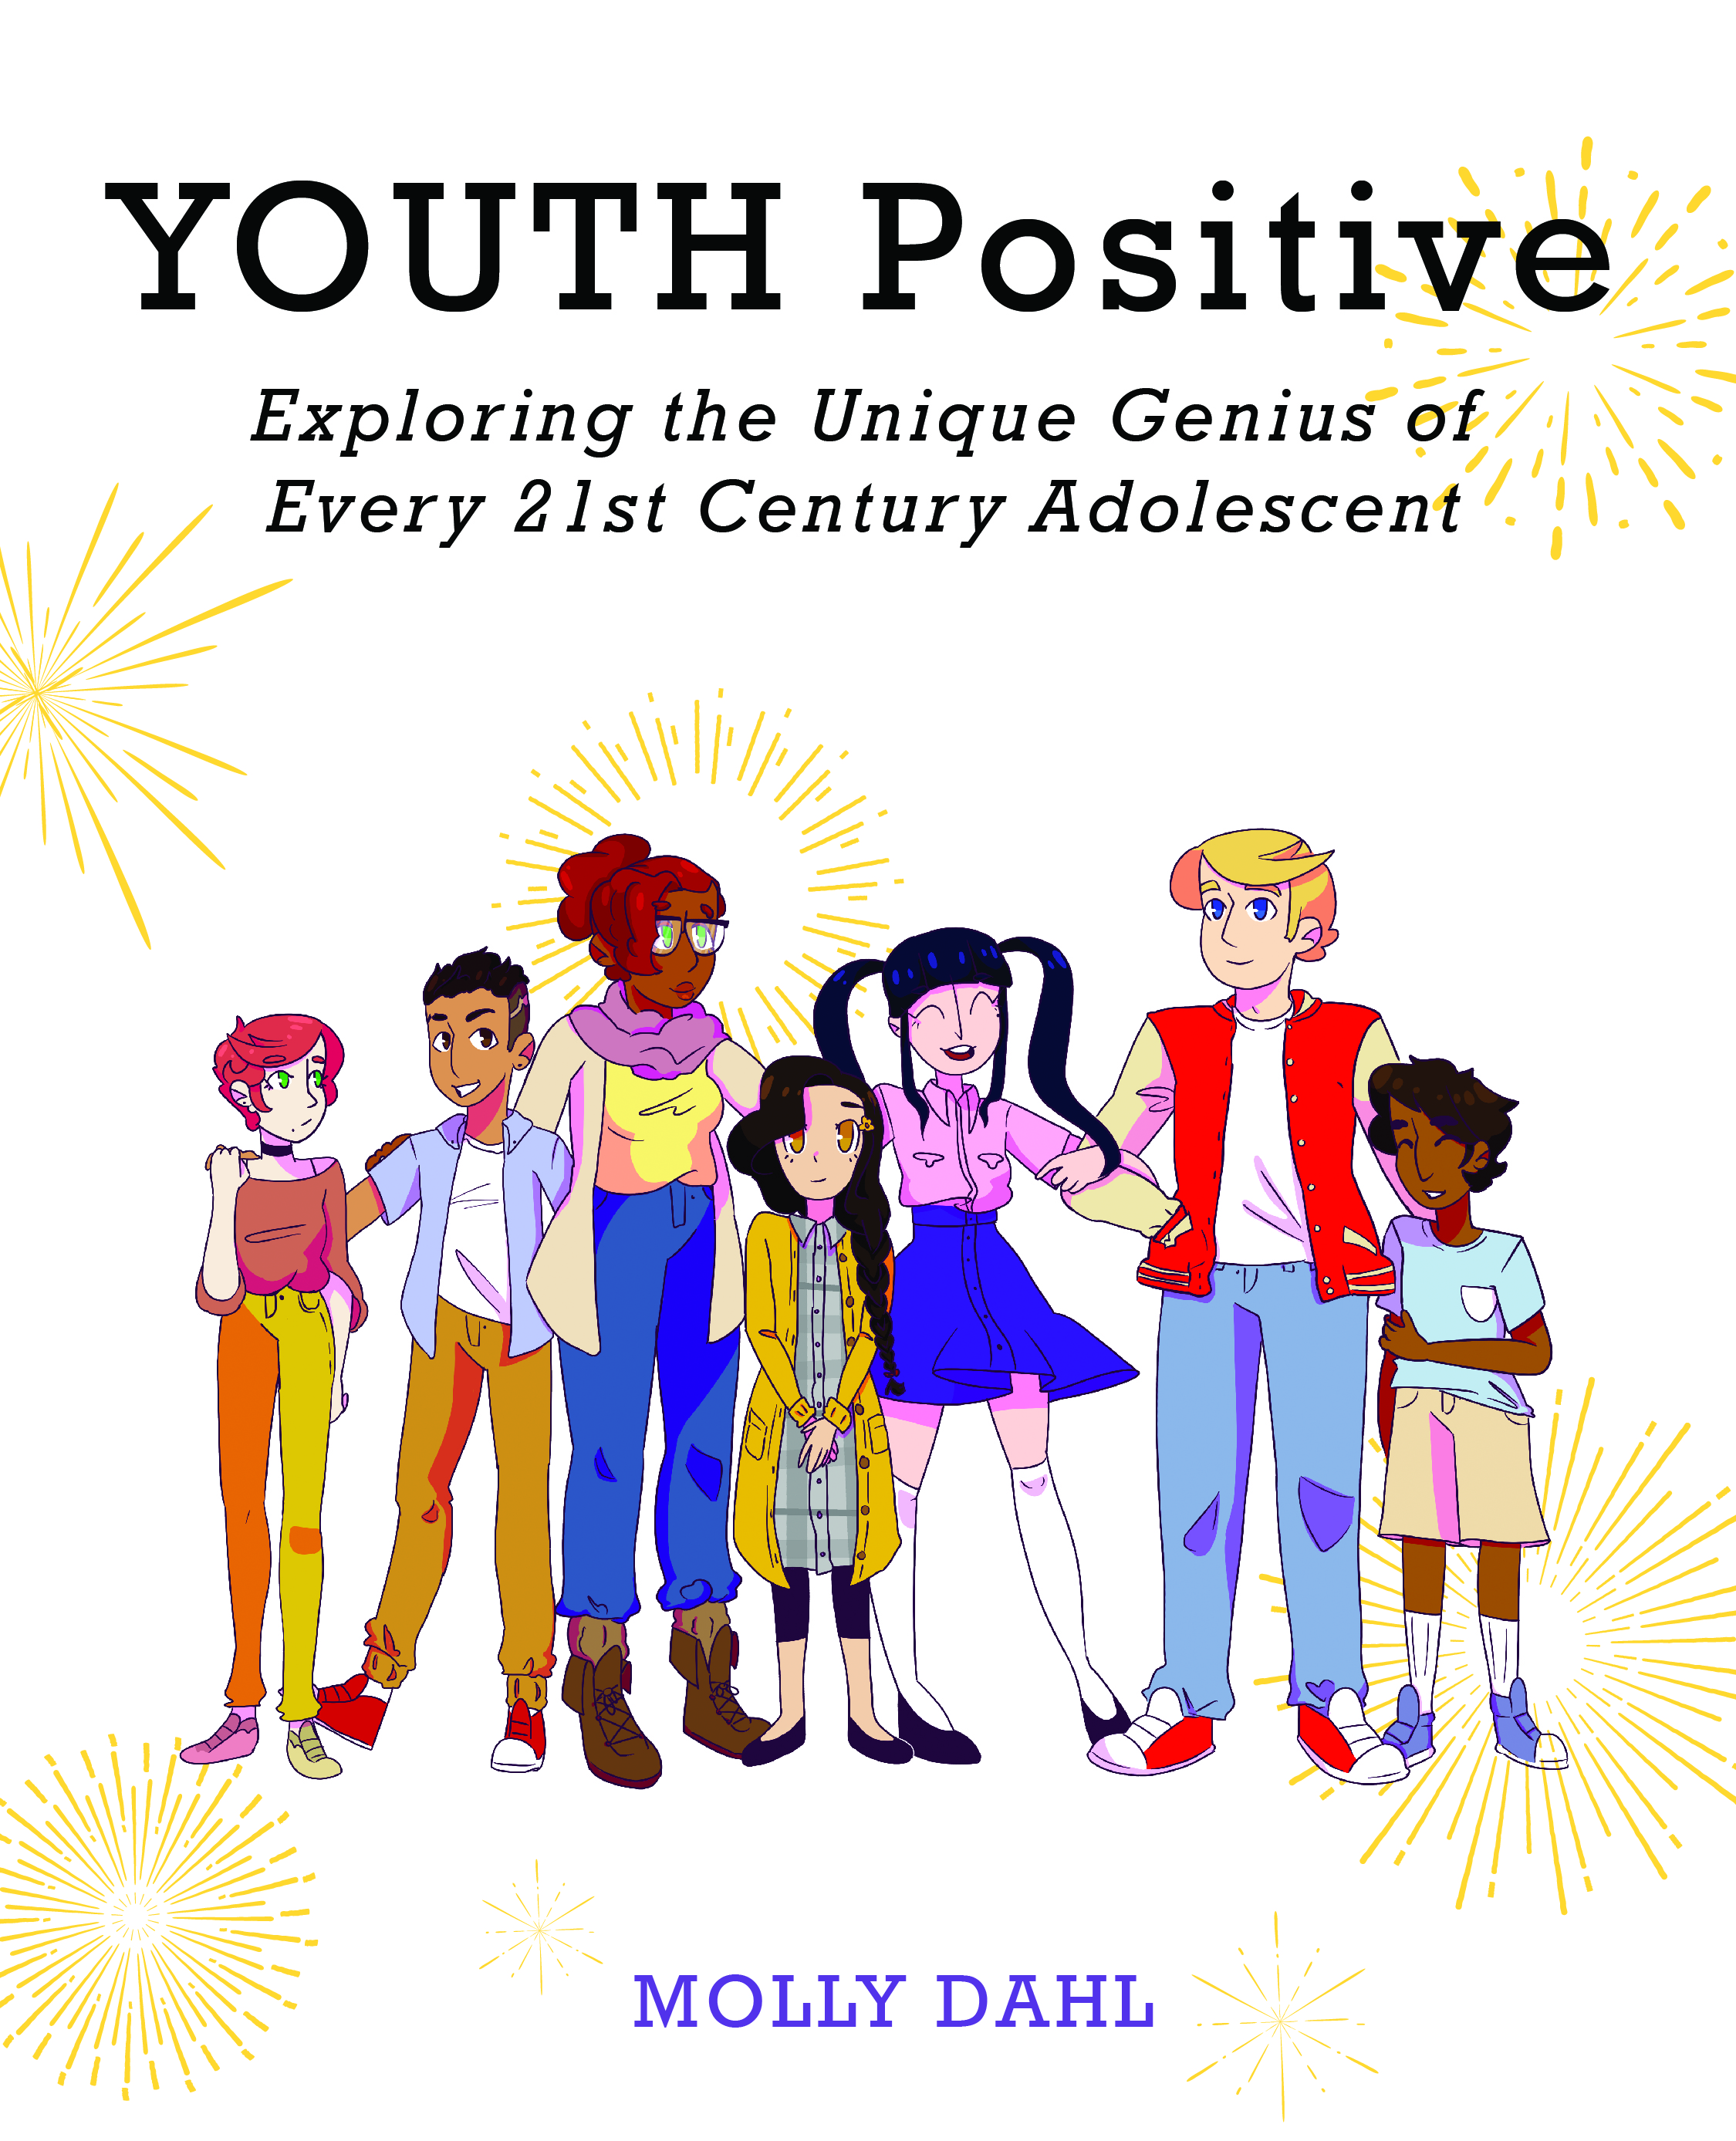 YOUTH Positive